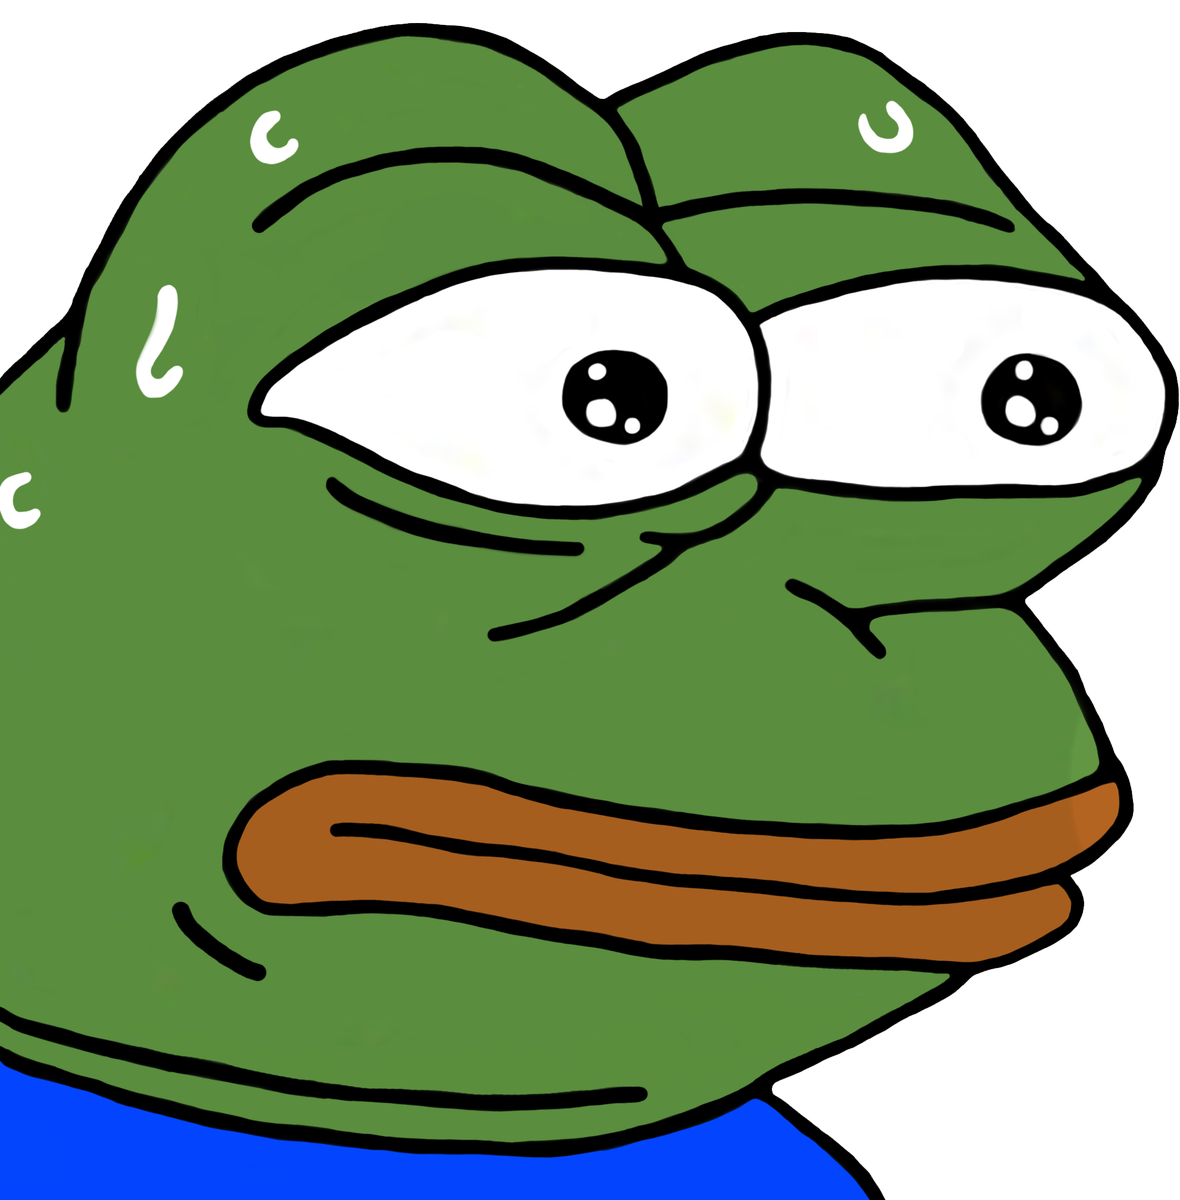 Download On Youtube Pepe Emote Frog T-Shirt The HQ PNG Image | FreePNGImg